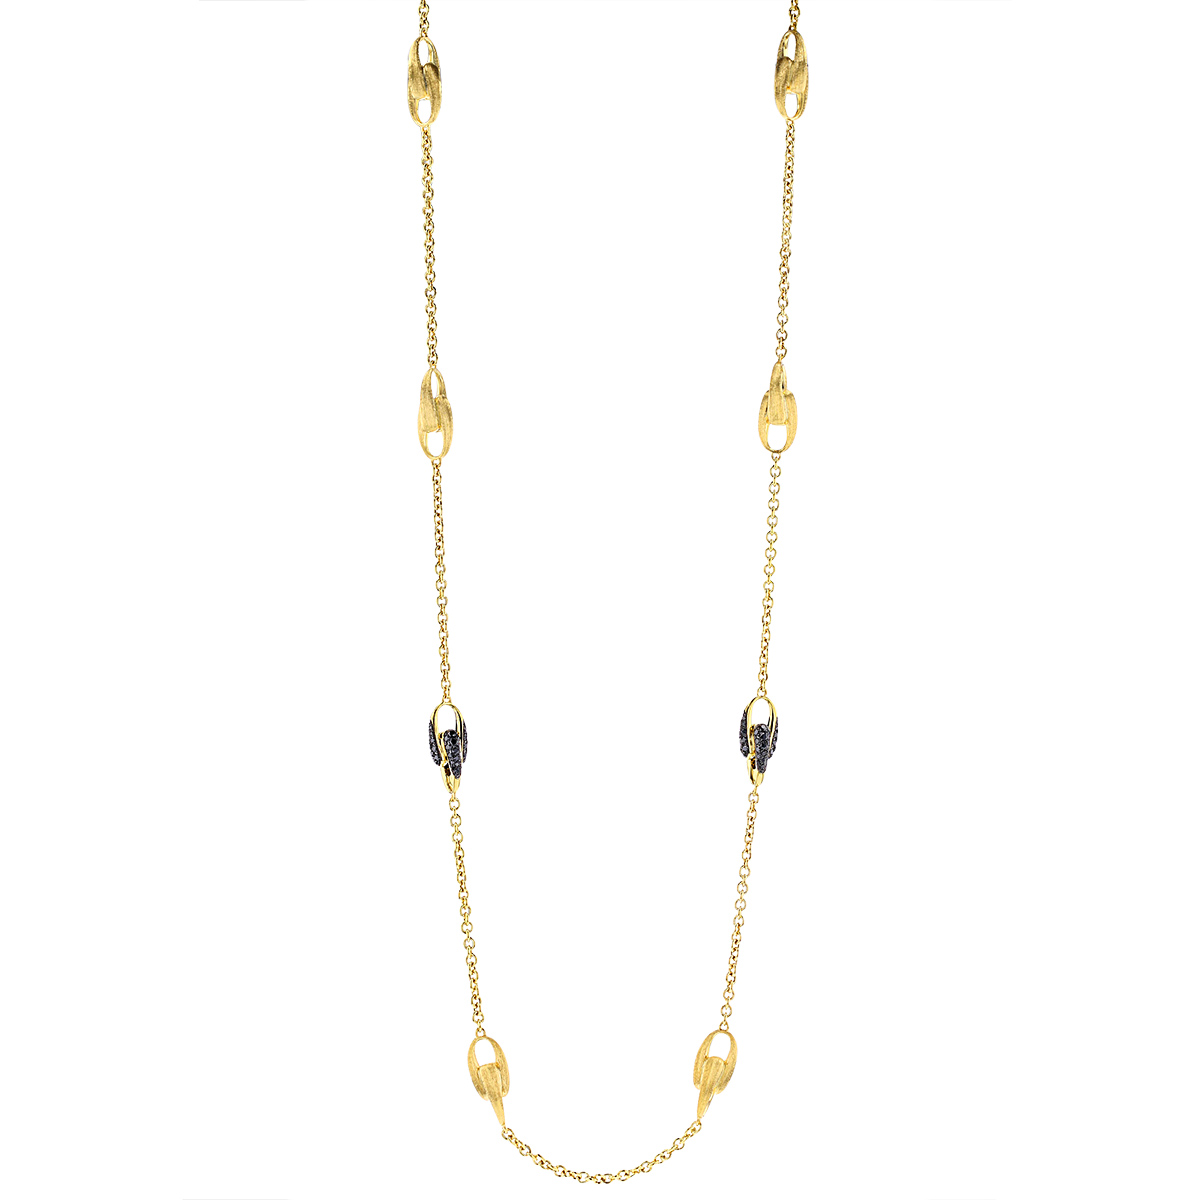 Marco Bicego Lucia Black Diamond Link Station Necklace in Yellow Gold ...